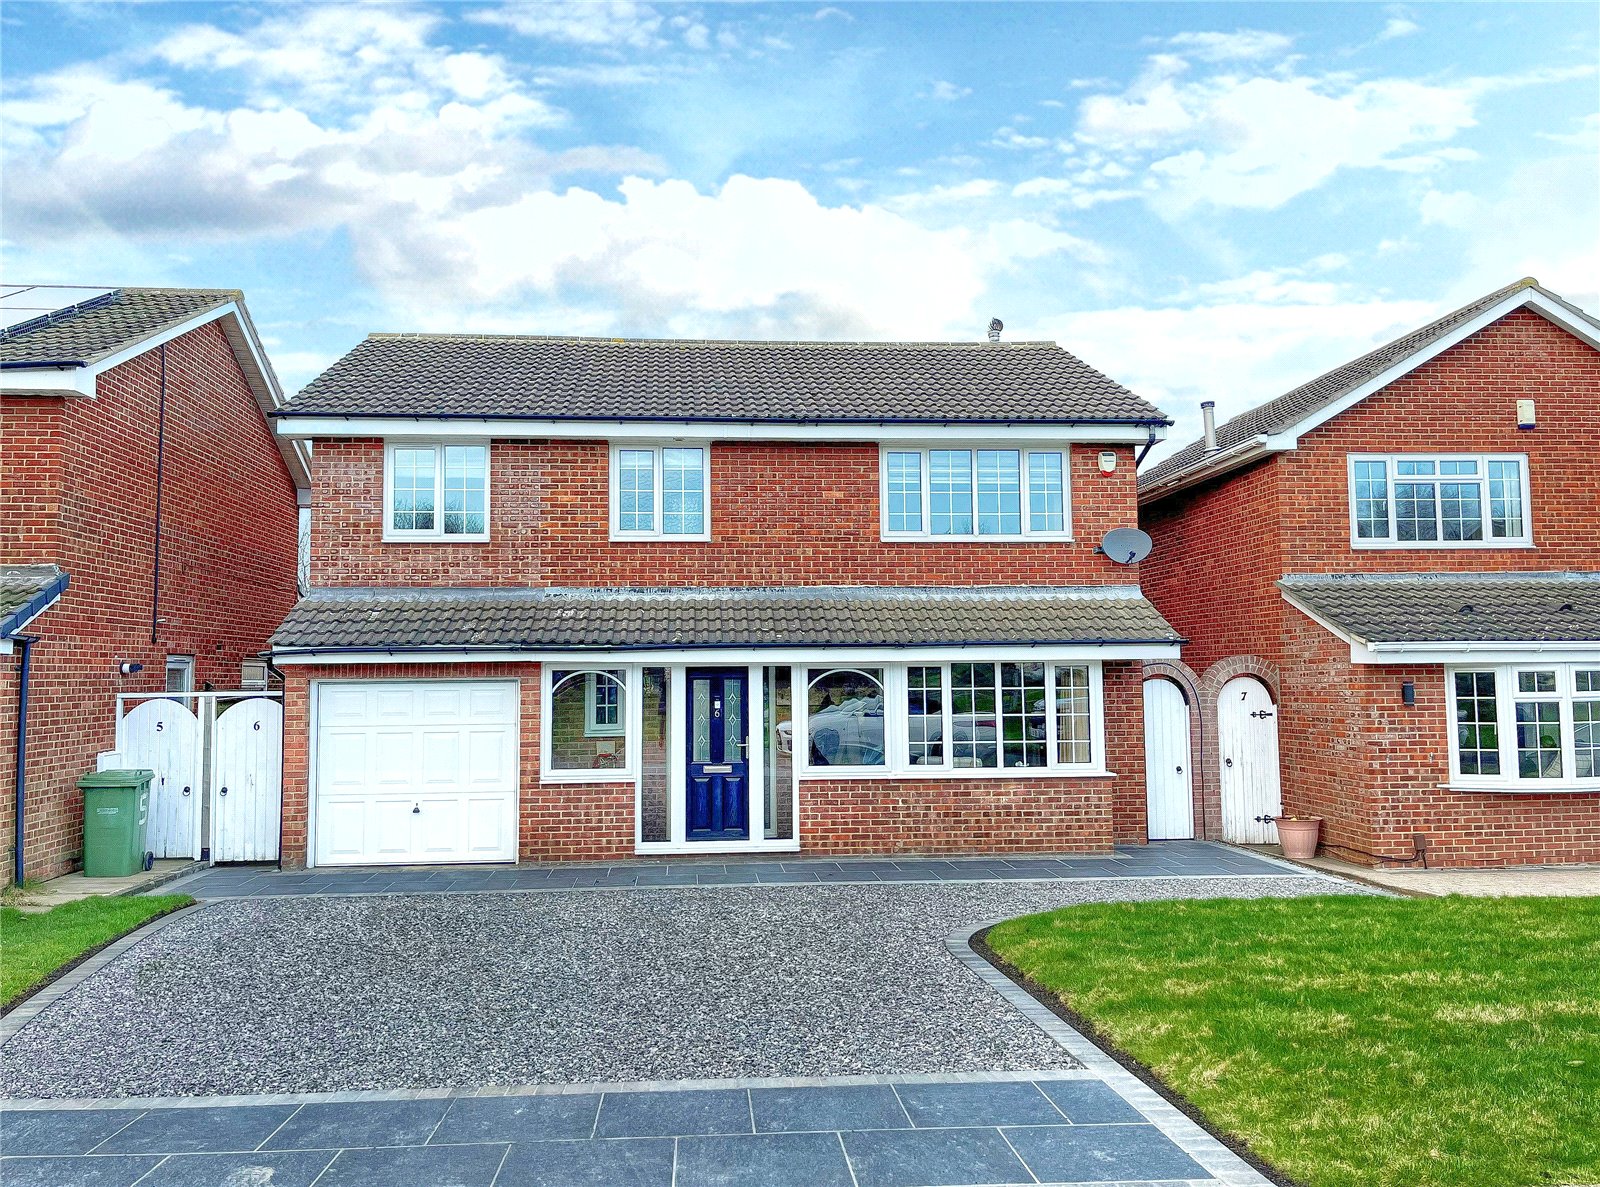 4 bed house for sale in Carpenter Close, Yarm - Property Image 1